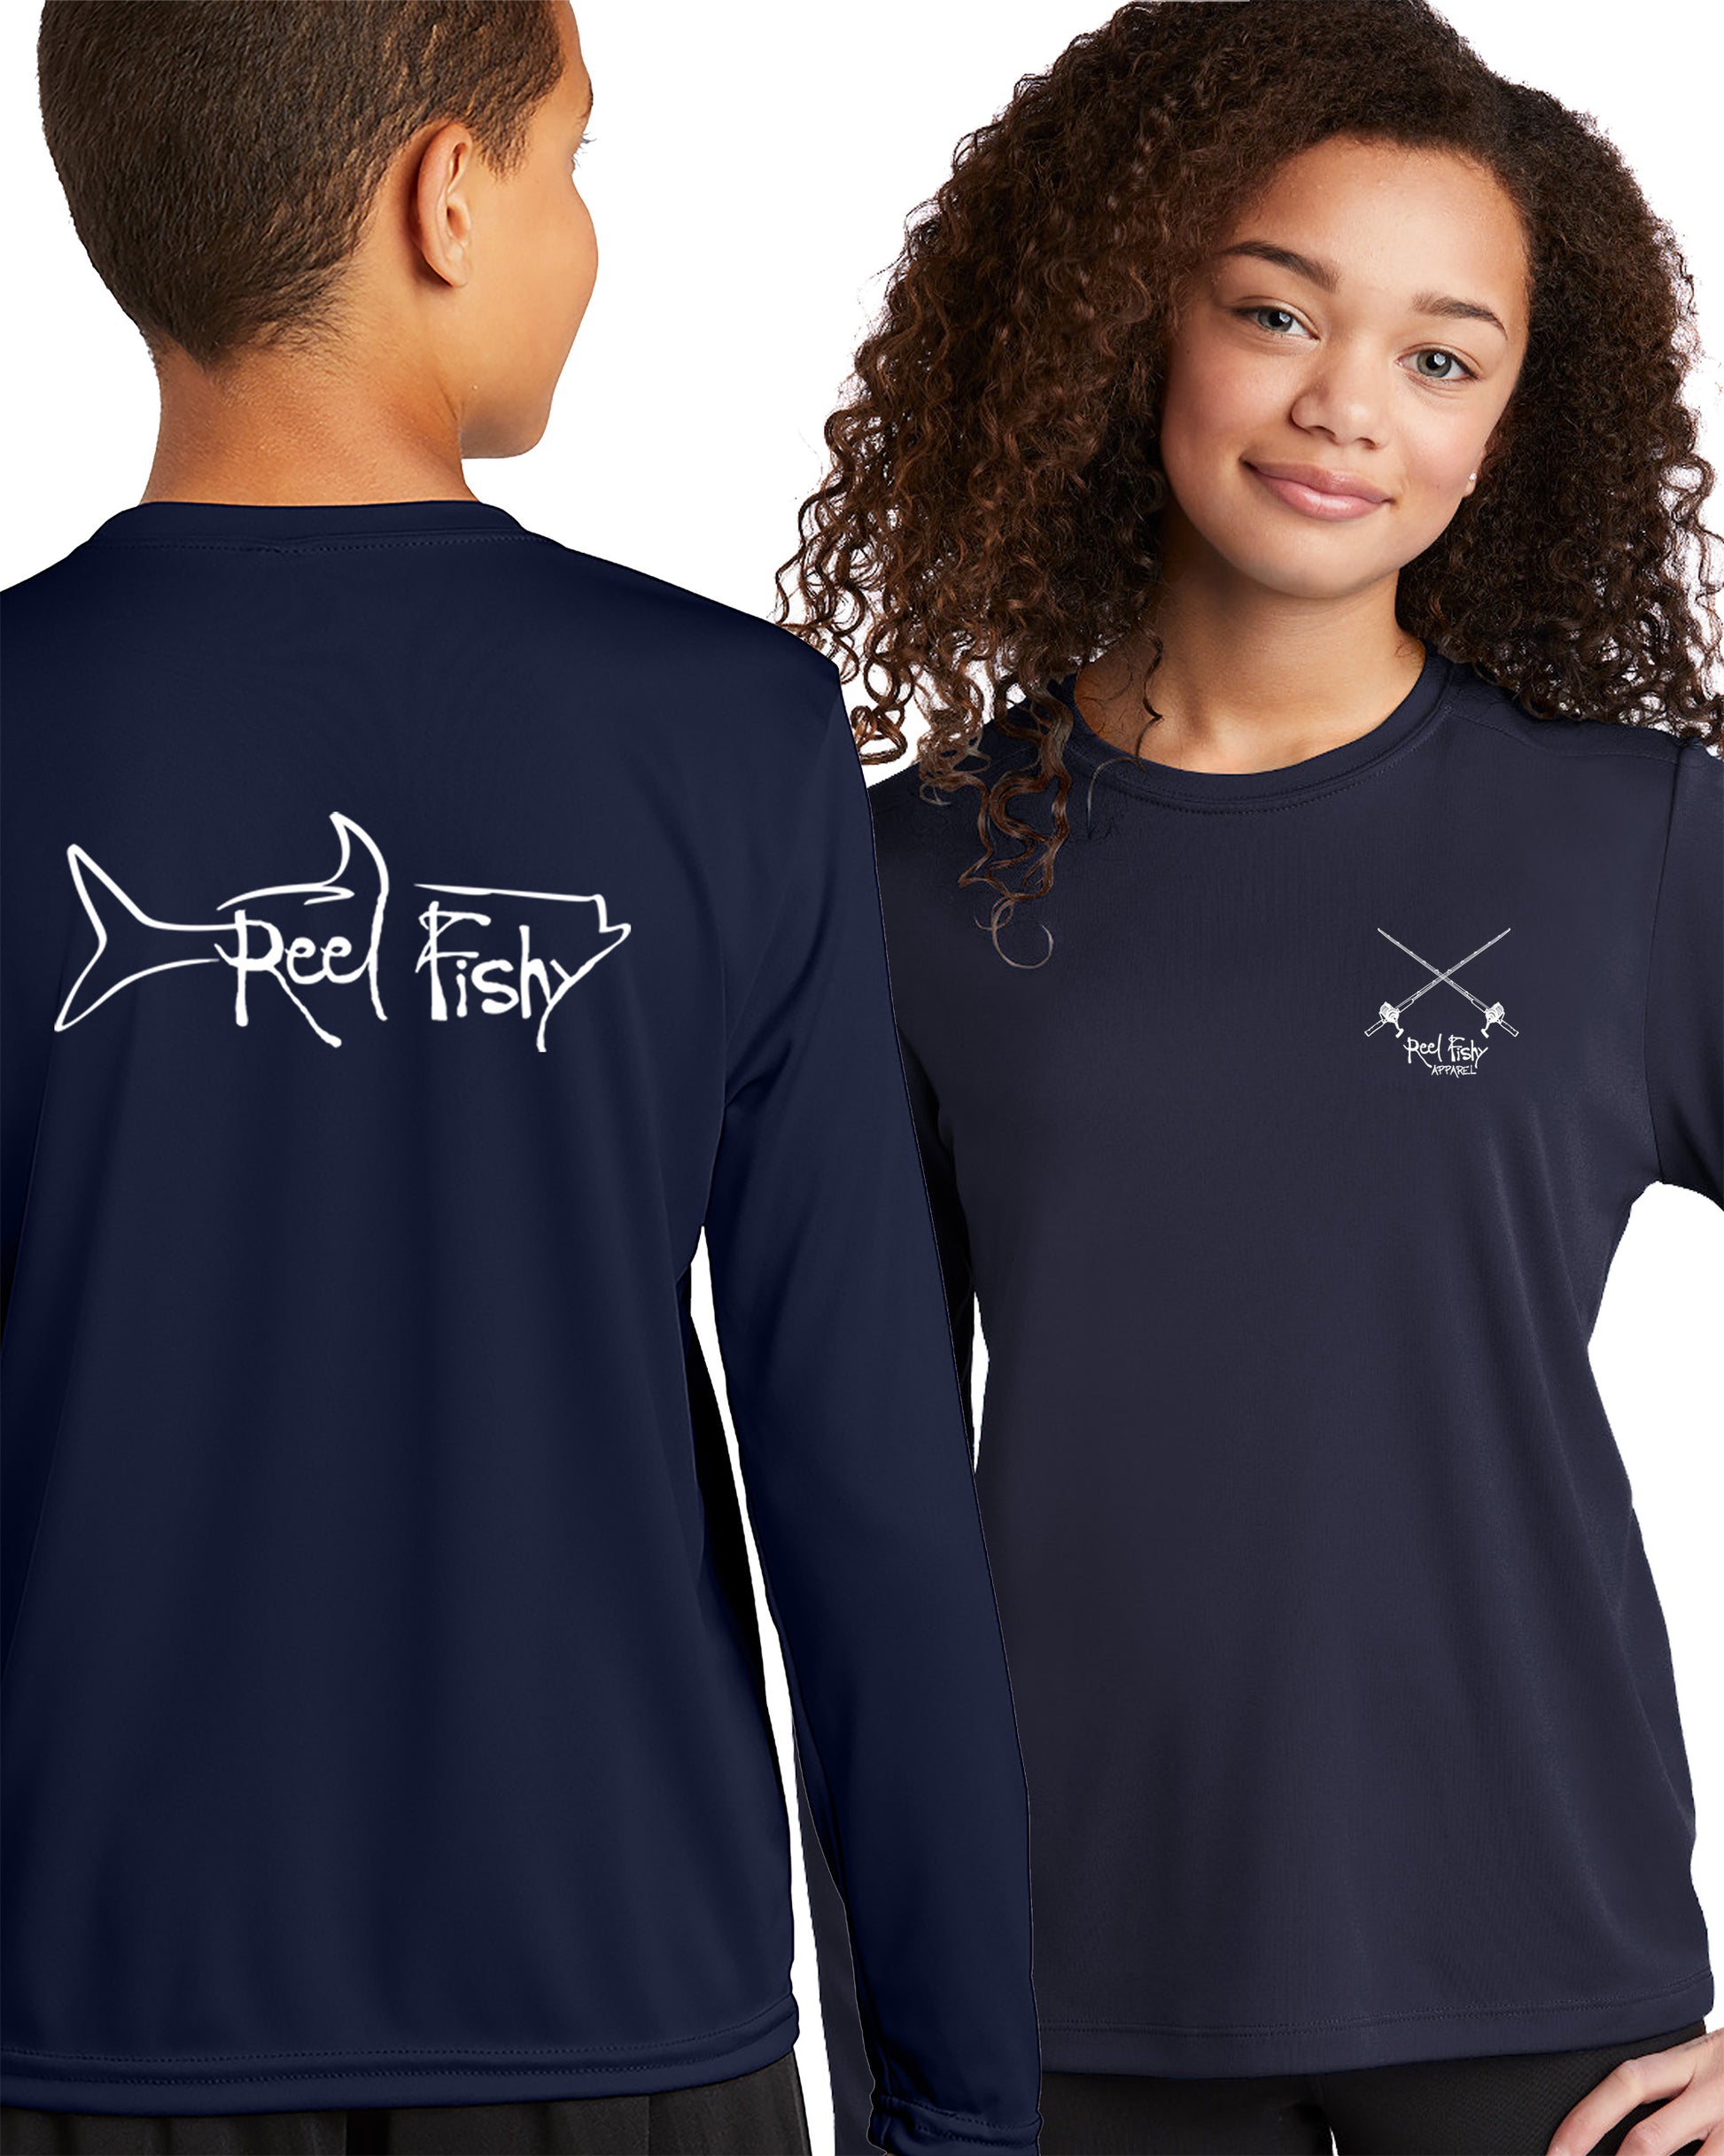 Youth Performance Dry-Fit Tarpon Fishing Shirts 50+Upf Sun Protection - Reel Fishy Apparel L / Pink S/S